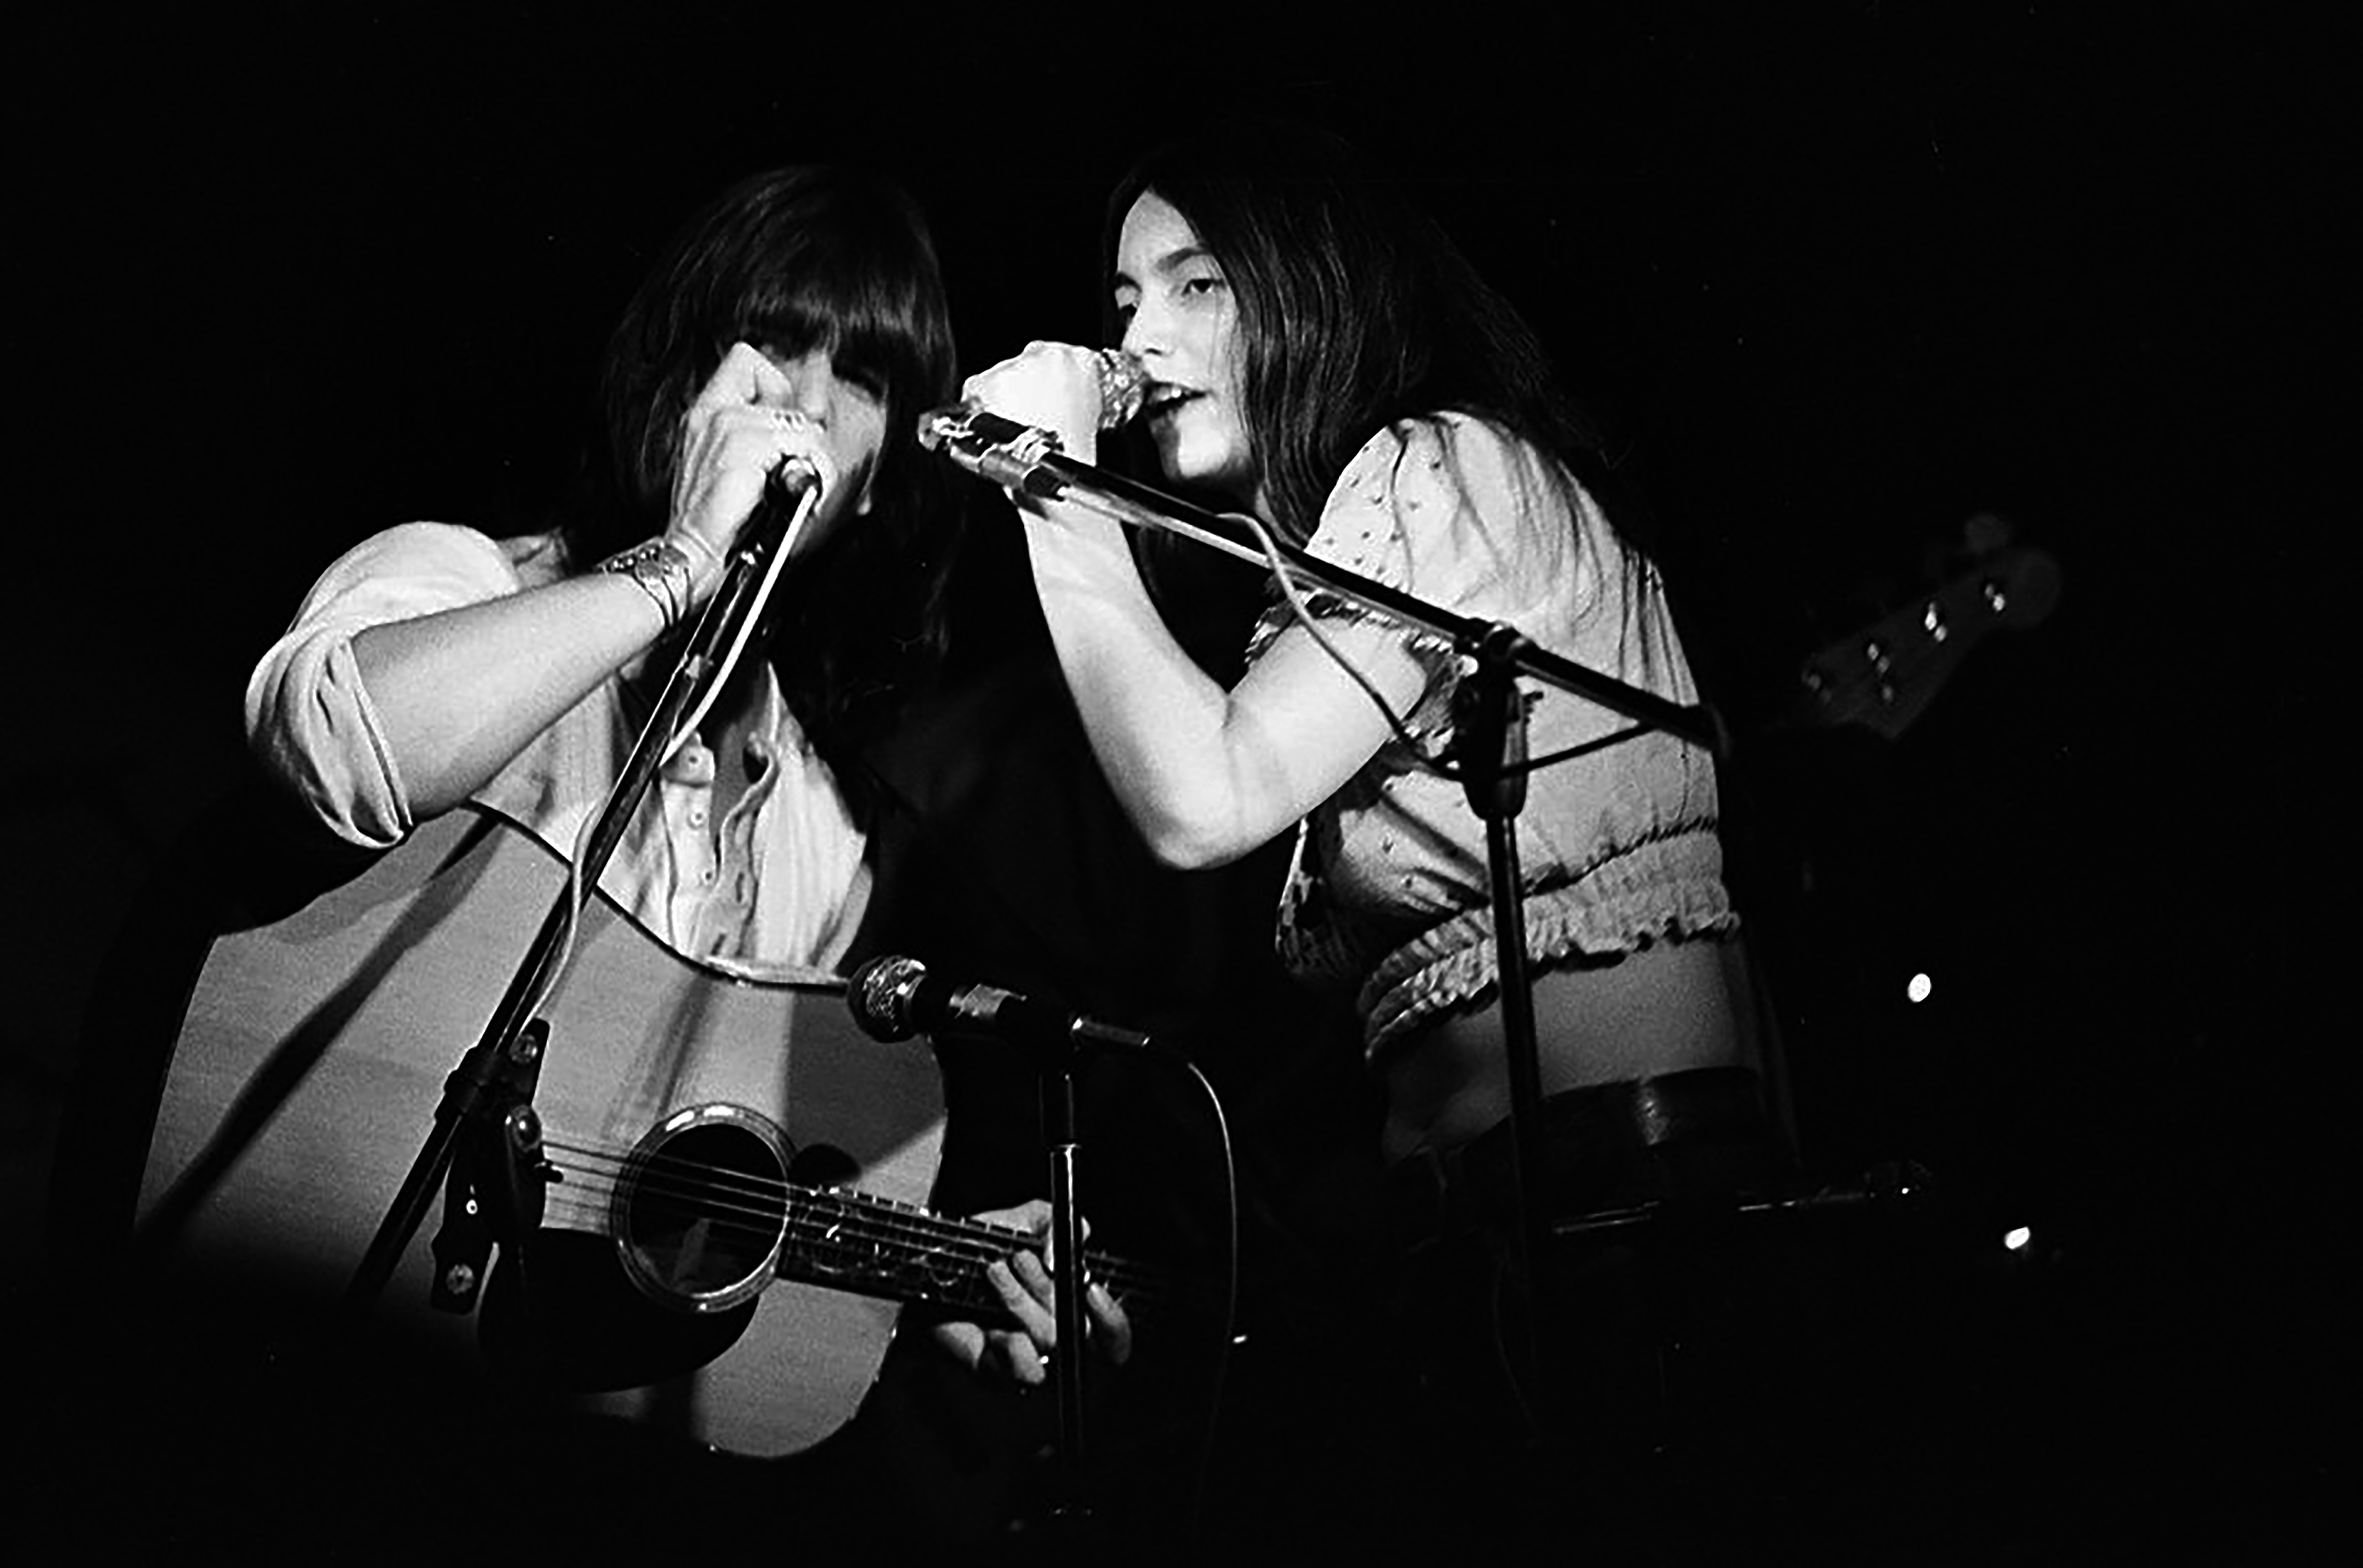 CHICAGO - MARCH 1973: (L-R) American singer, songwriter, guitarist and pianist Gram Parsons (1946-1973) performing with American singer, songwriter, and musician Emmylou Harris during Parson's 